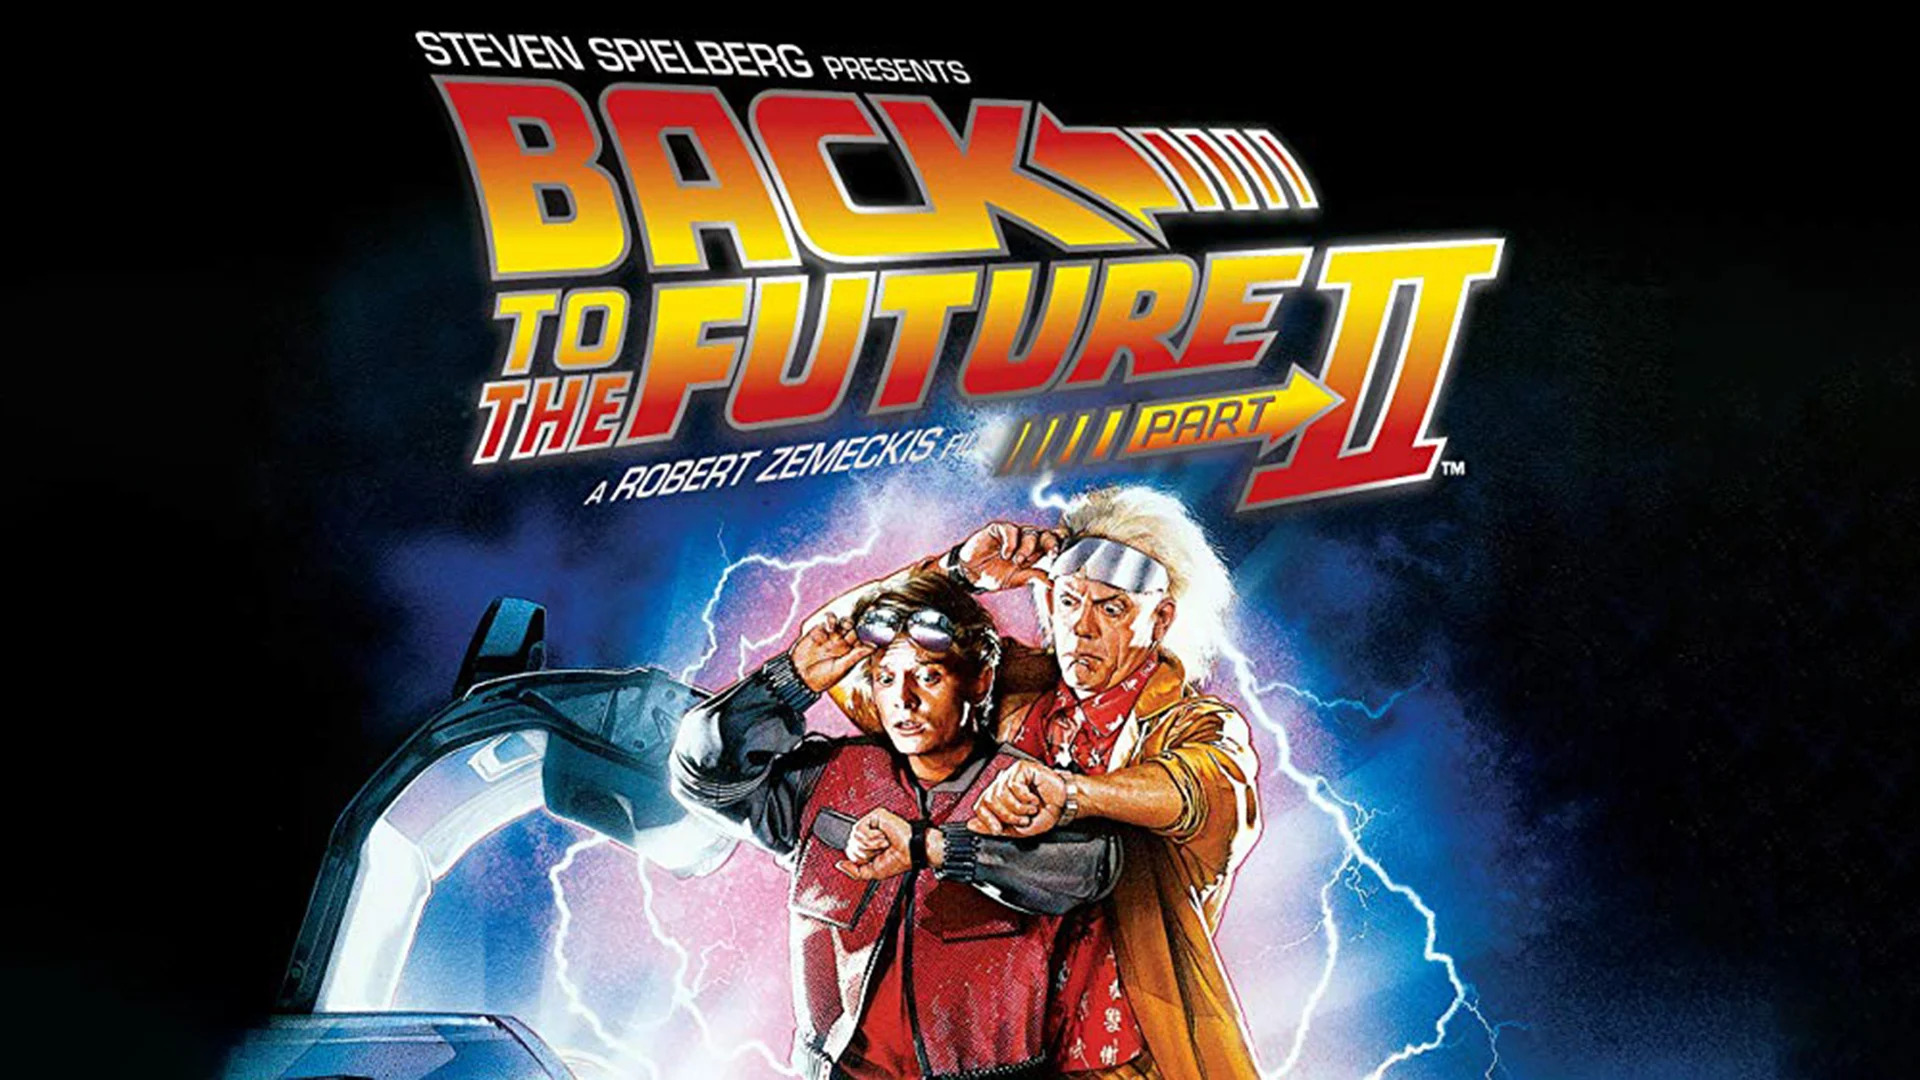 15 things you probably didn't know about 'Back to the Future